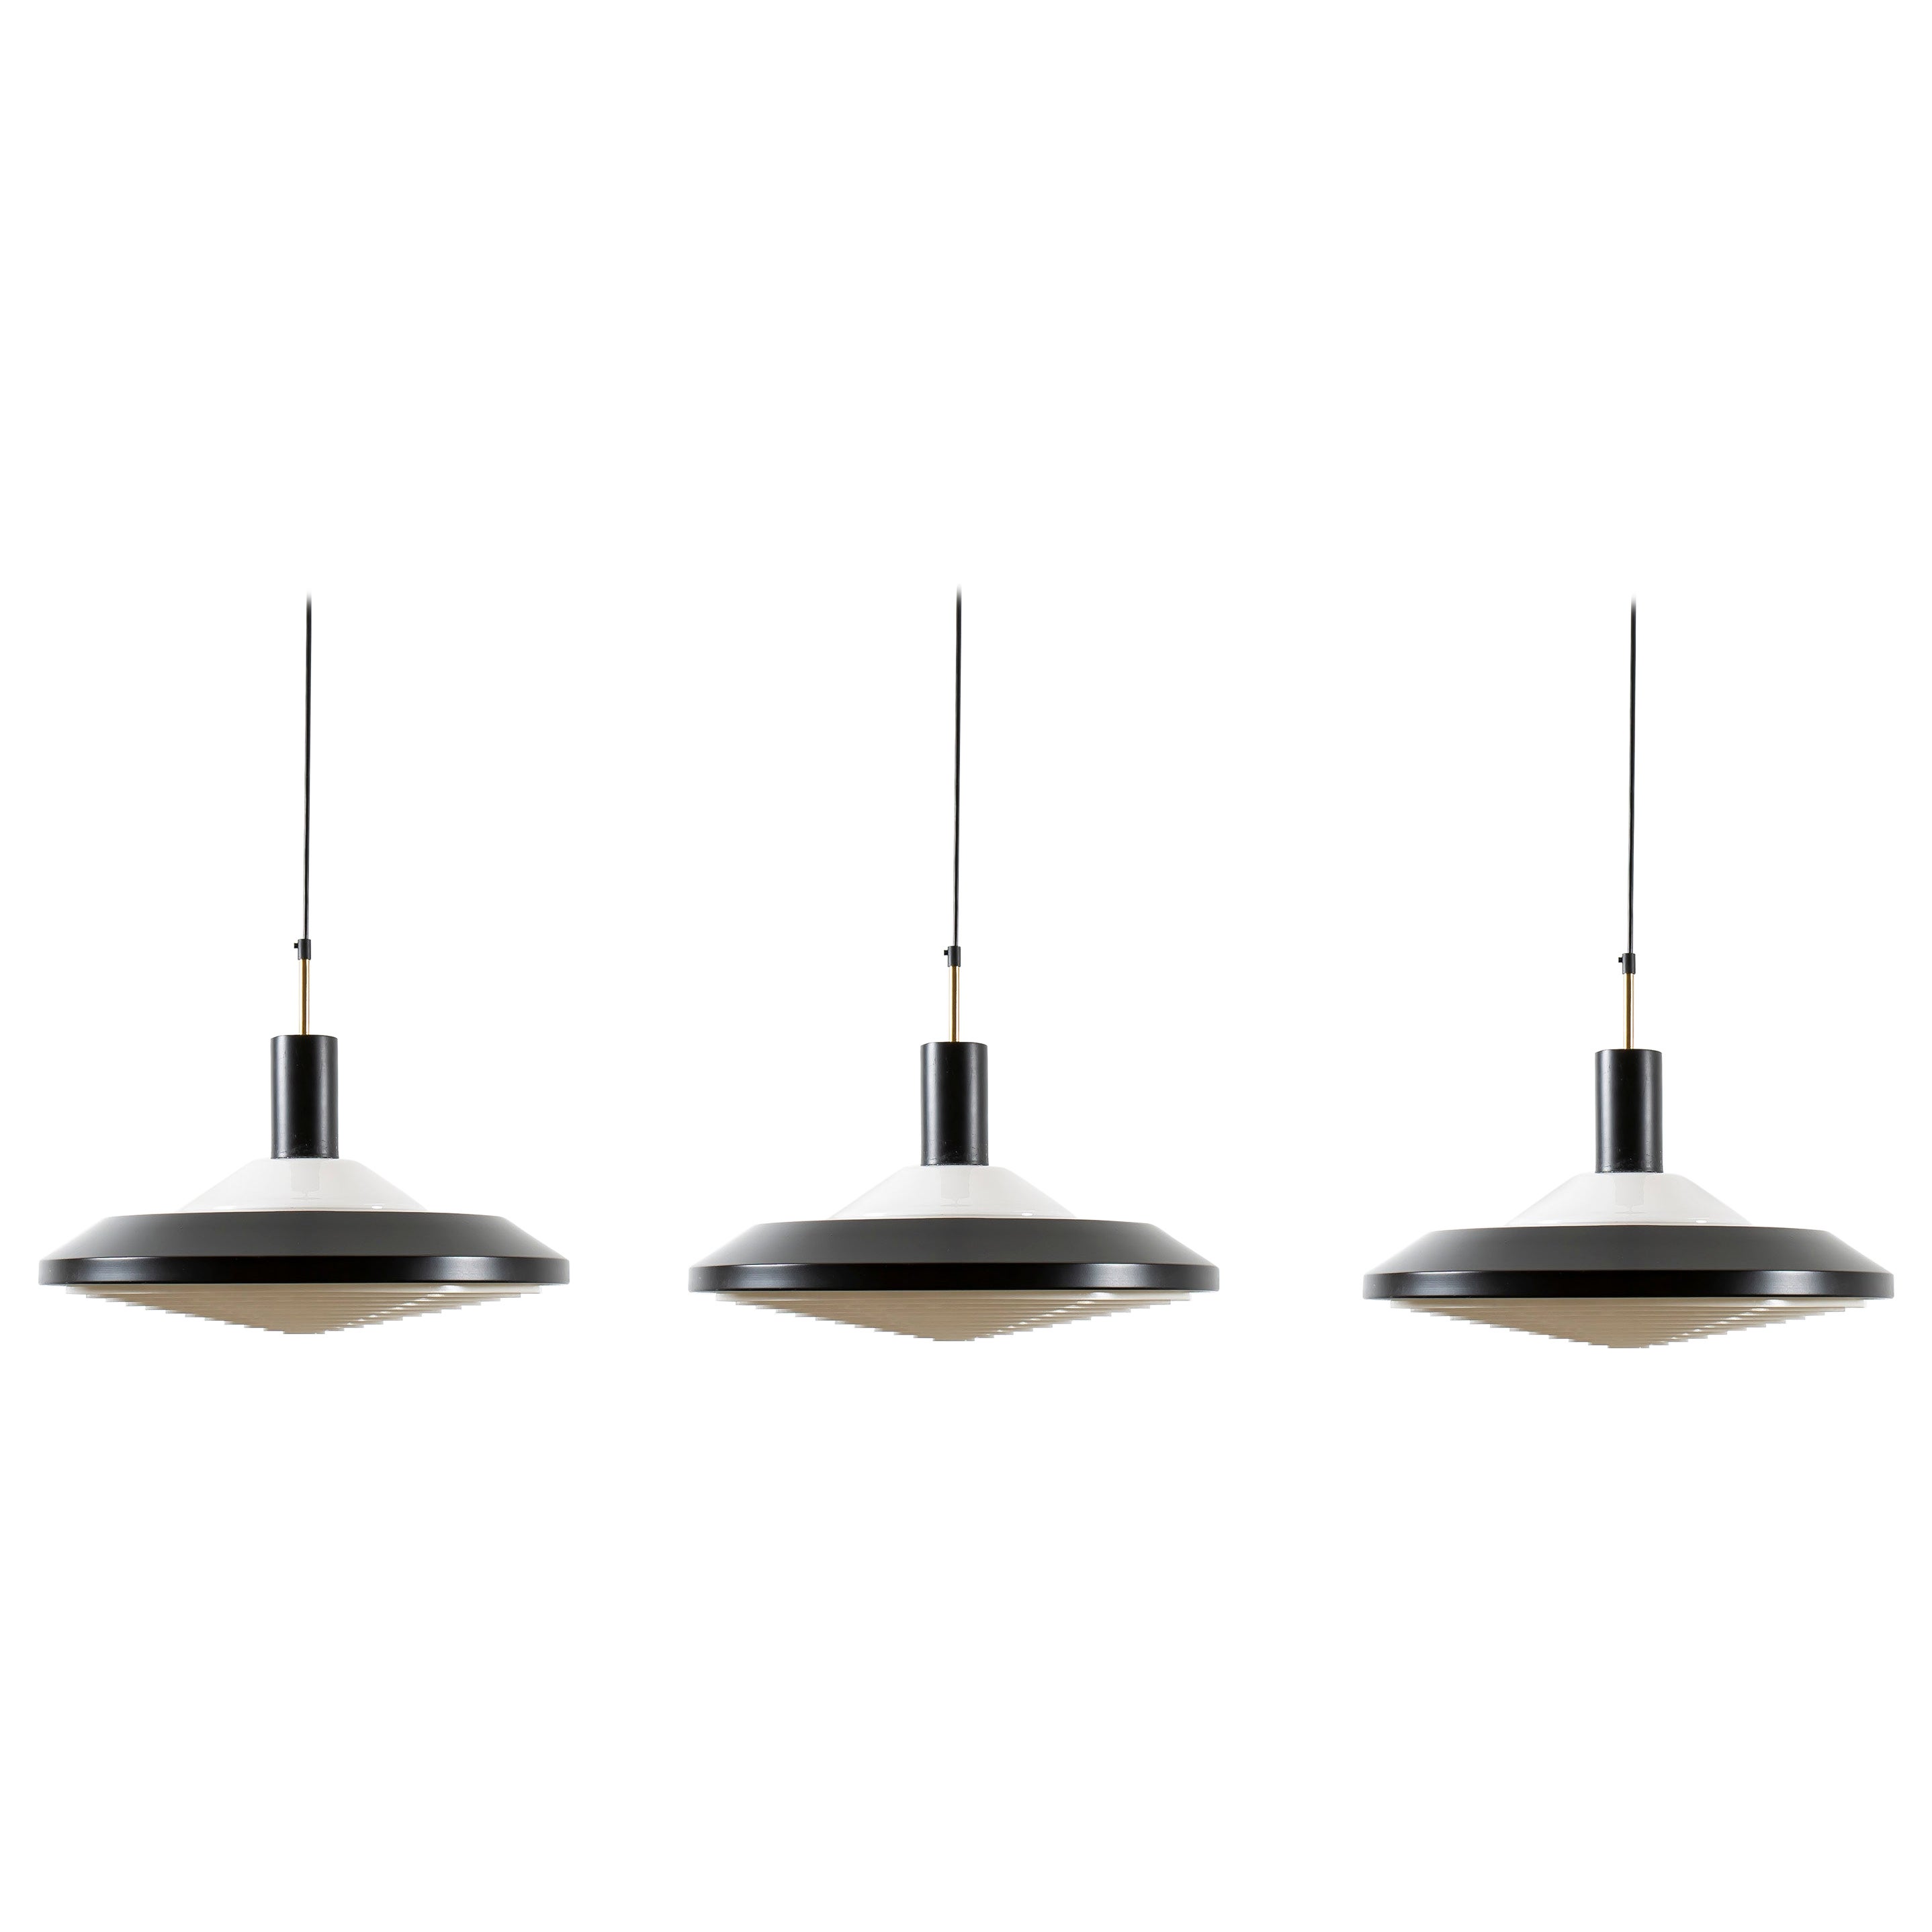 Set of Three Midcentury Ceiling Lights by AWF, Norway, 1960s For Sale